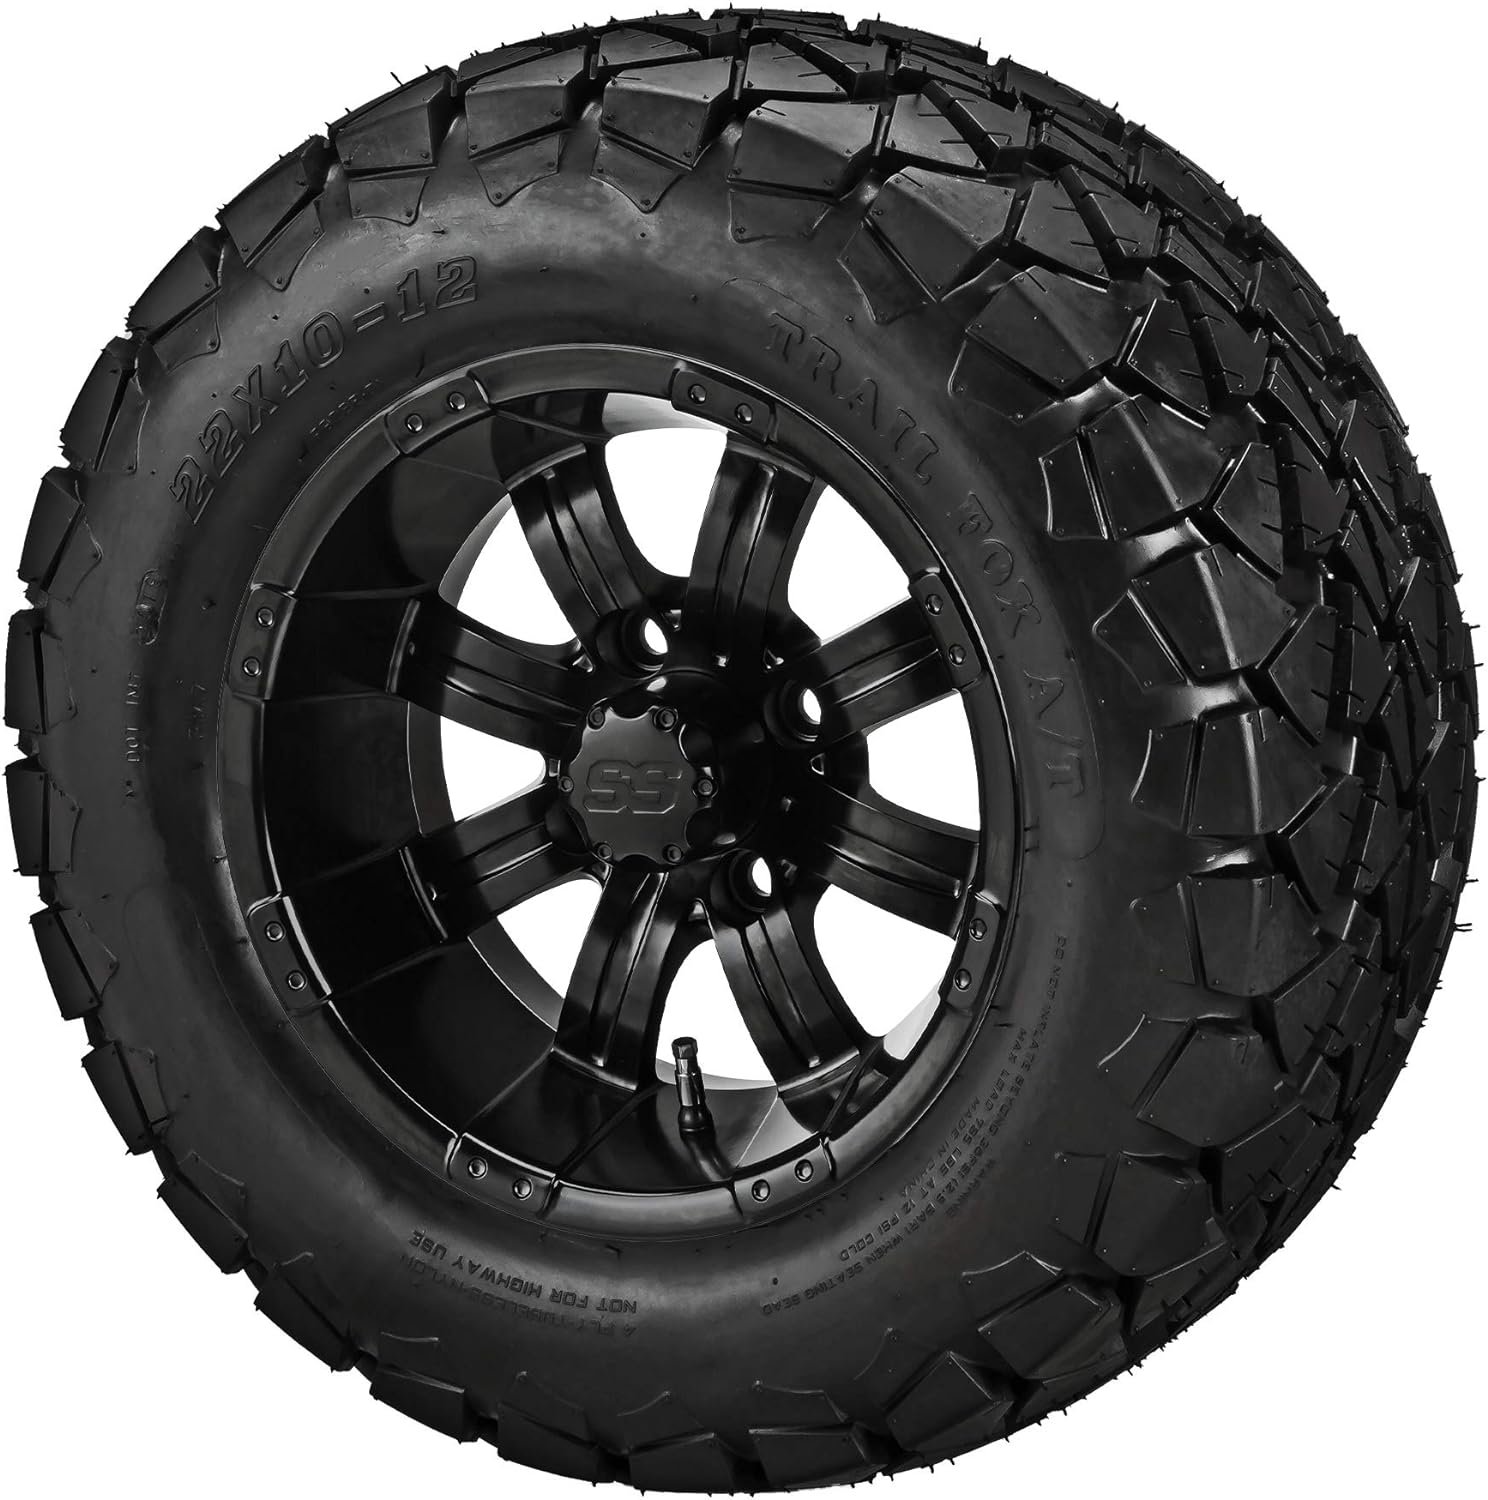 RM Cart - 12 Casino Matte Black on 22x10-12 Trail Fox A/T Tires (Set of 4), Fits Club Car  EZGo carts, Golf Cart Tires and Wheels Combo, Can be Used on Lawn Mowers and ATVs